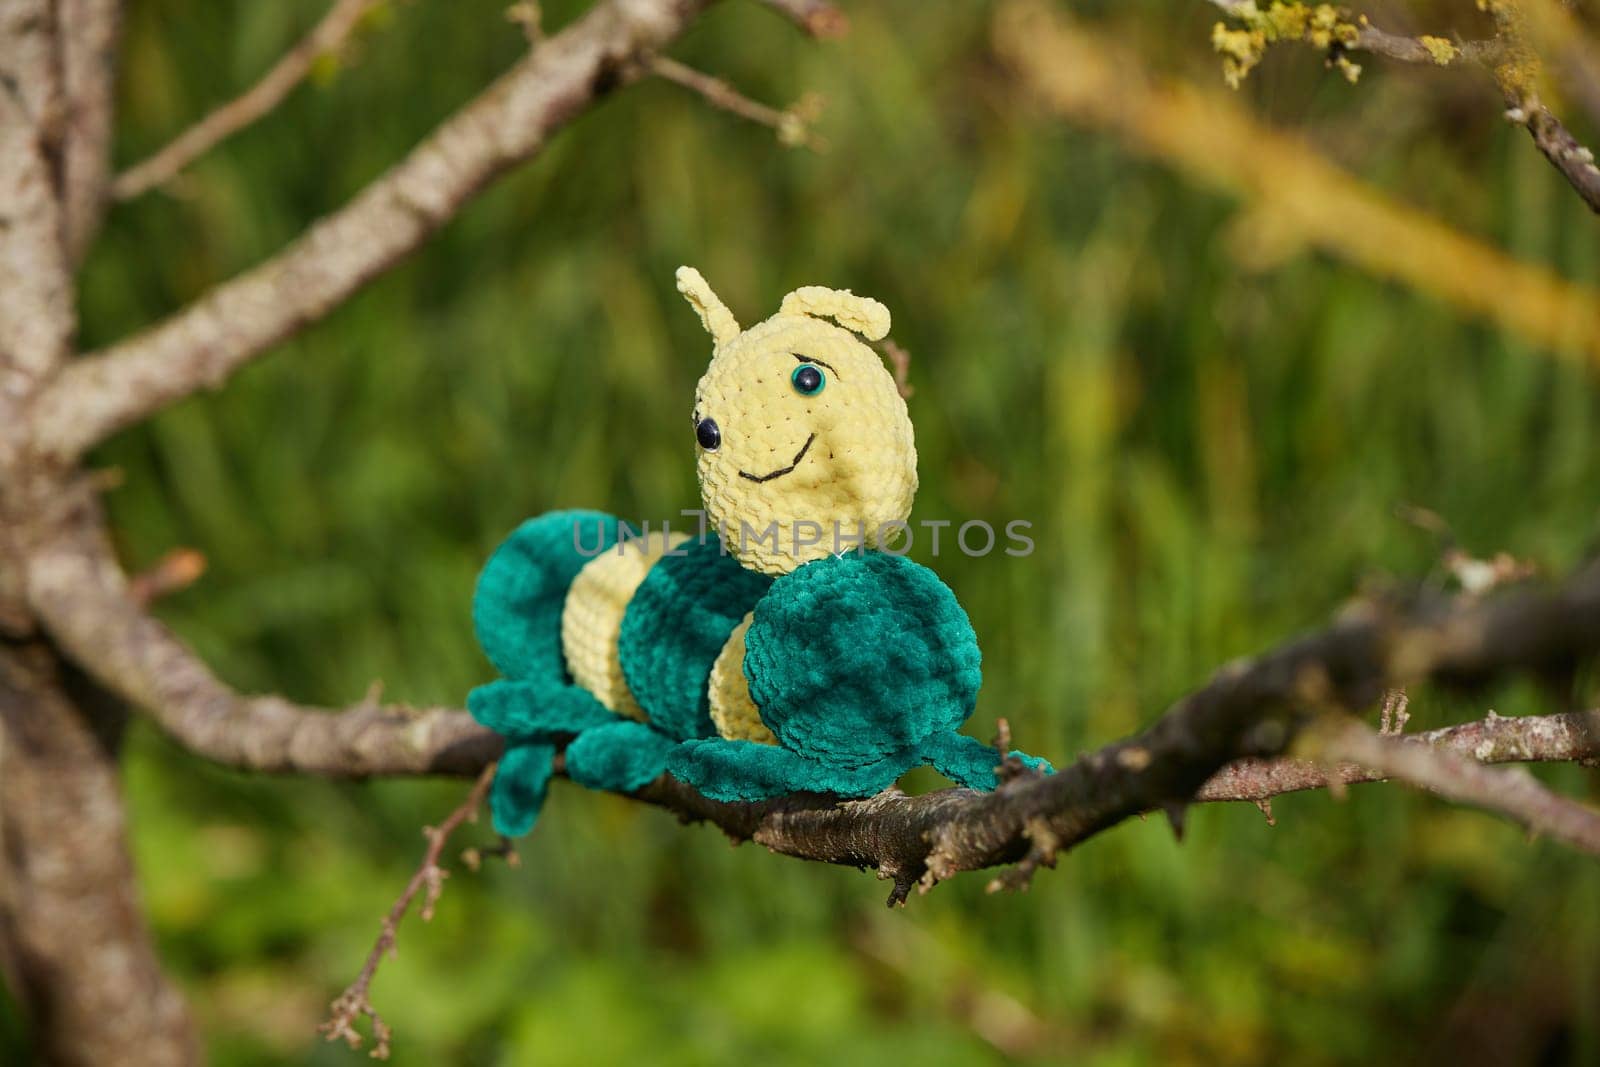 Knitted toy caterpillar on a tree in the garden by Viktor_Osypenko